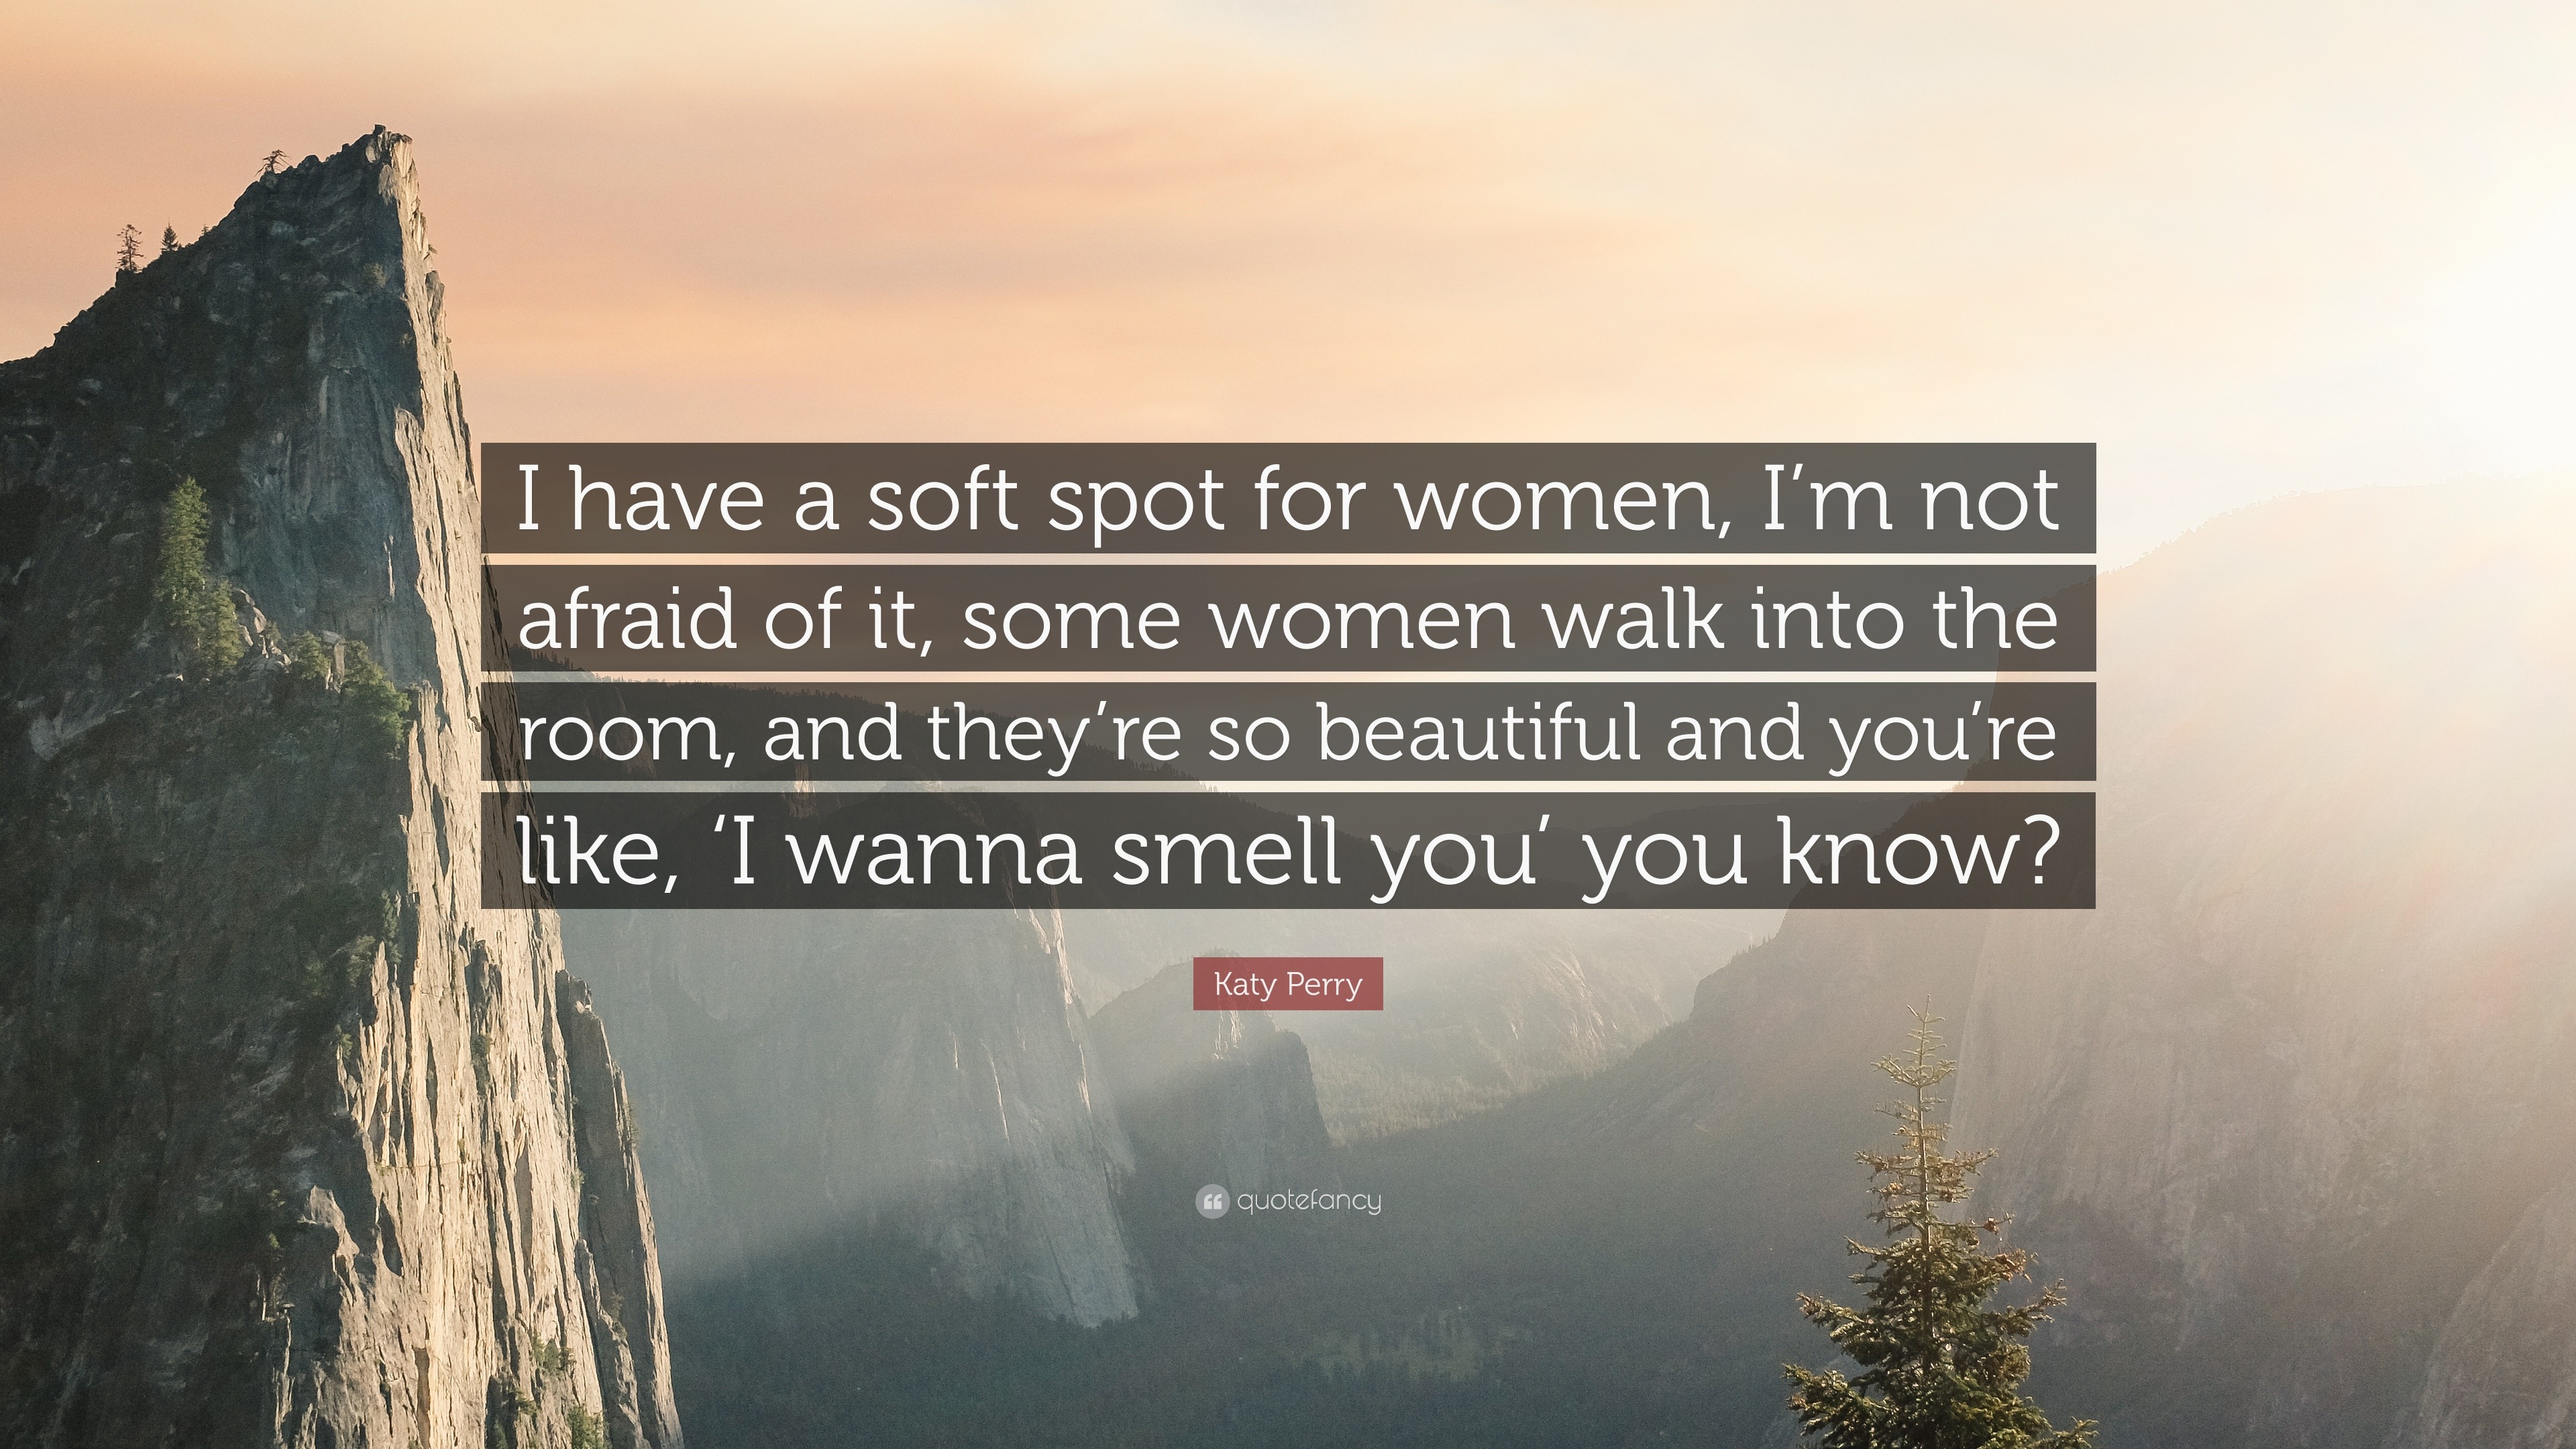 Katy Perry Quote: “I have a soft spot 